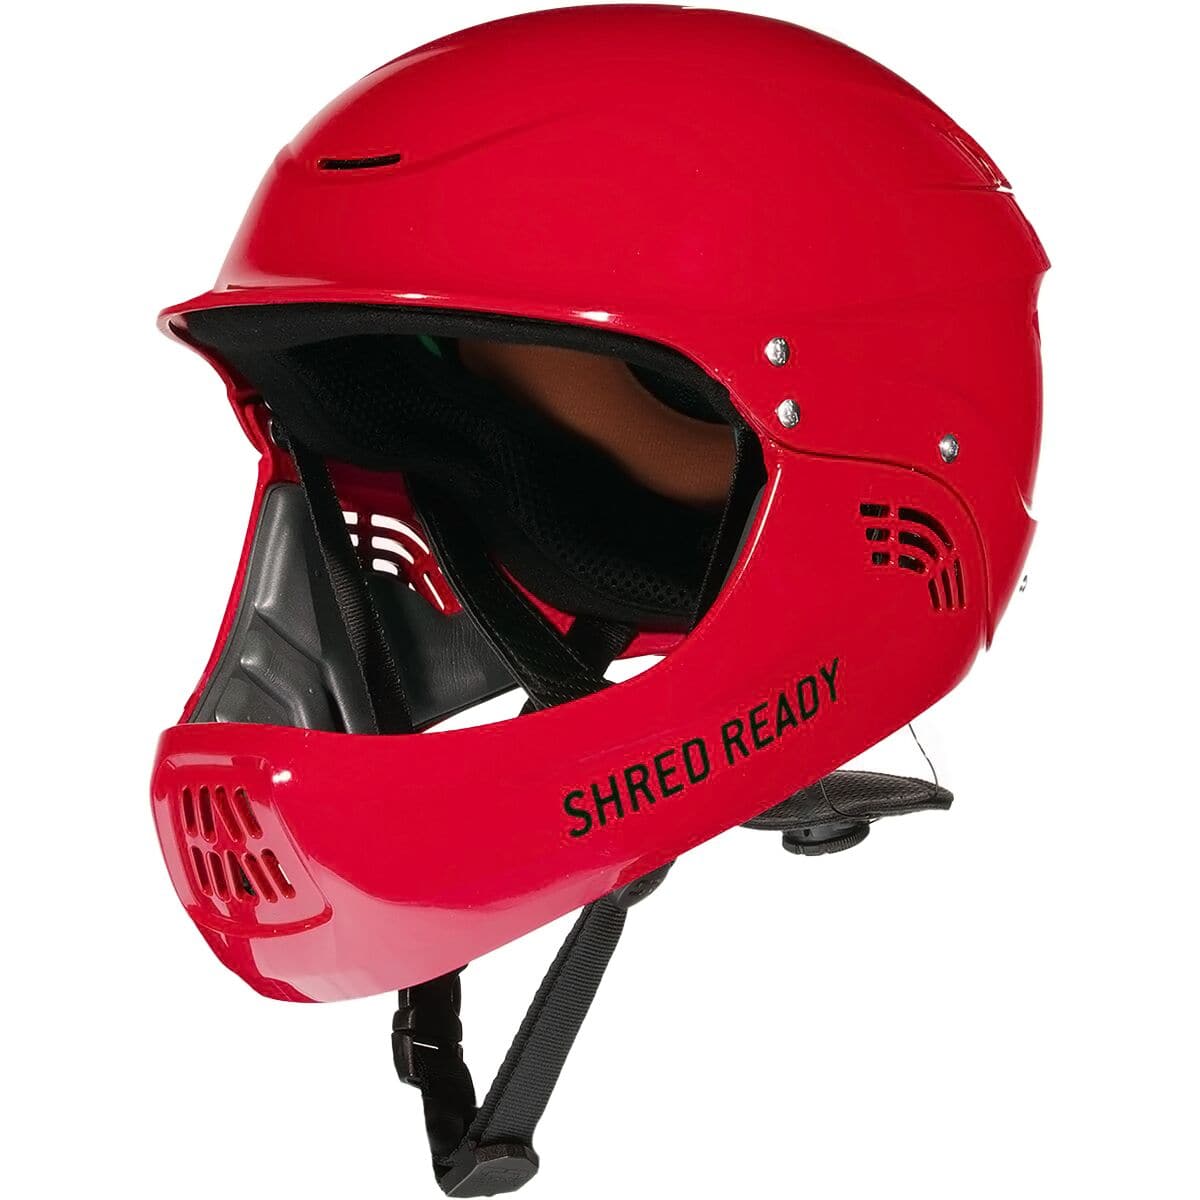 Featuring the Standard Fullface Helmet helmet manufactured by Shred Ready shown here from a sixth angle.